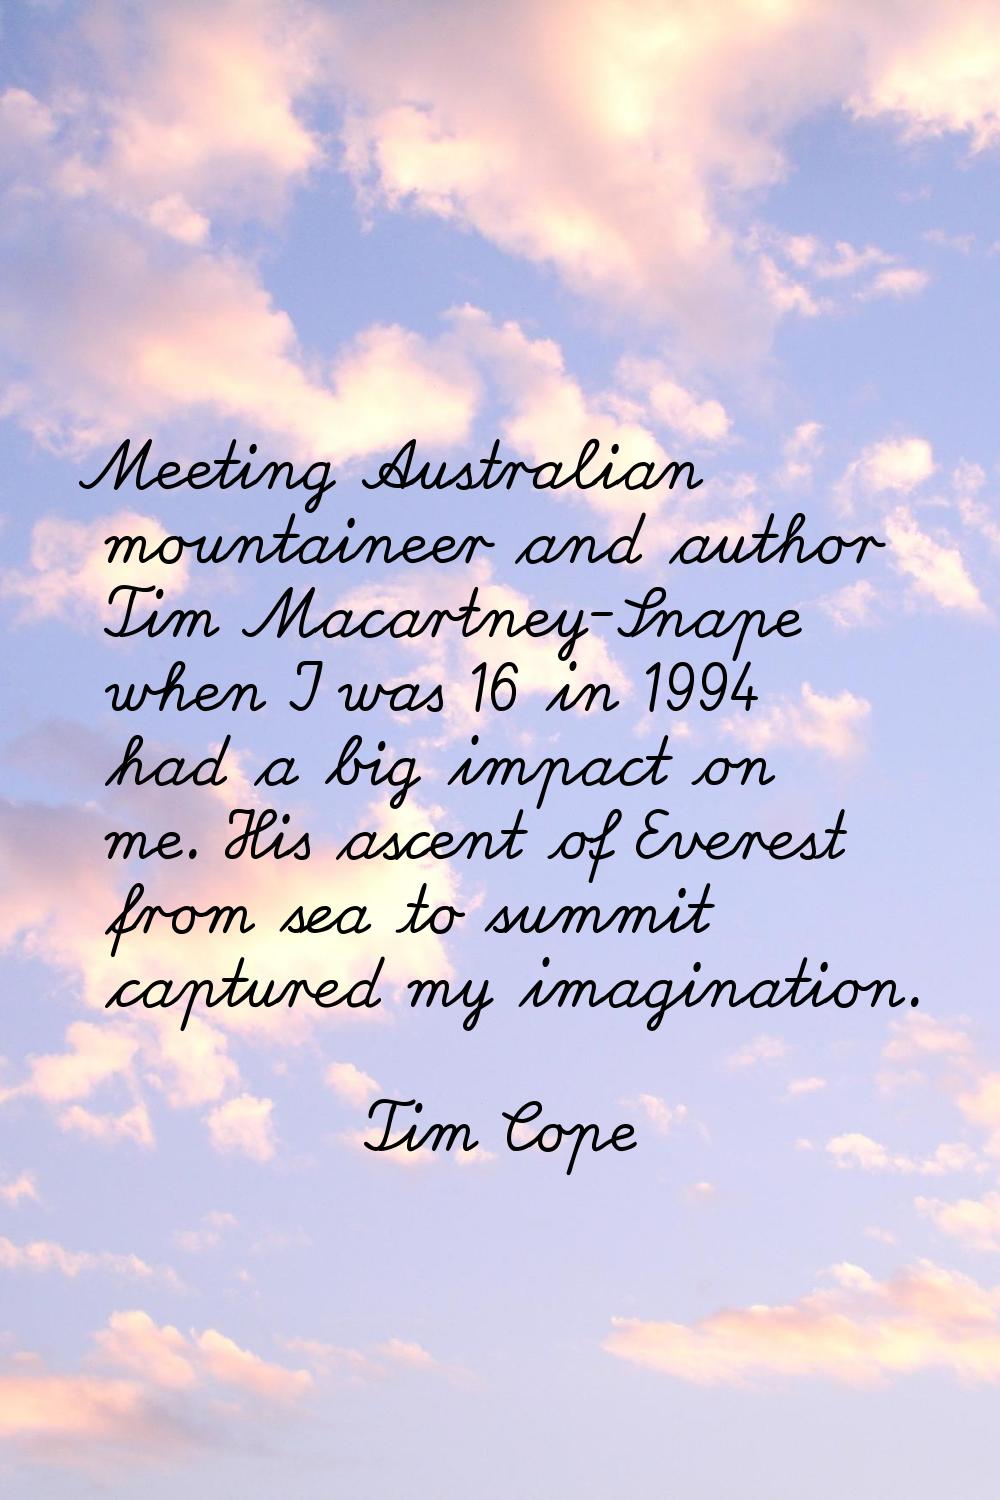 Meeting Australian mountaineer and author Tim Macartney-Snape when I was 16 in 1994 had a big impac